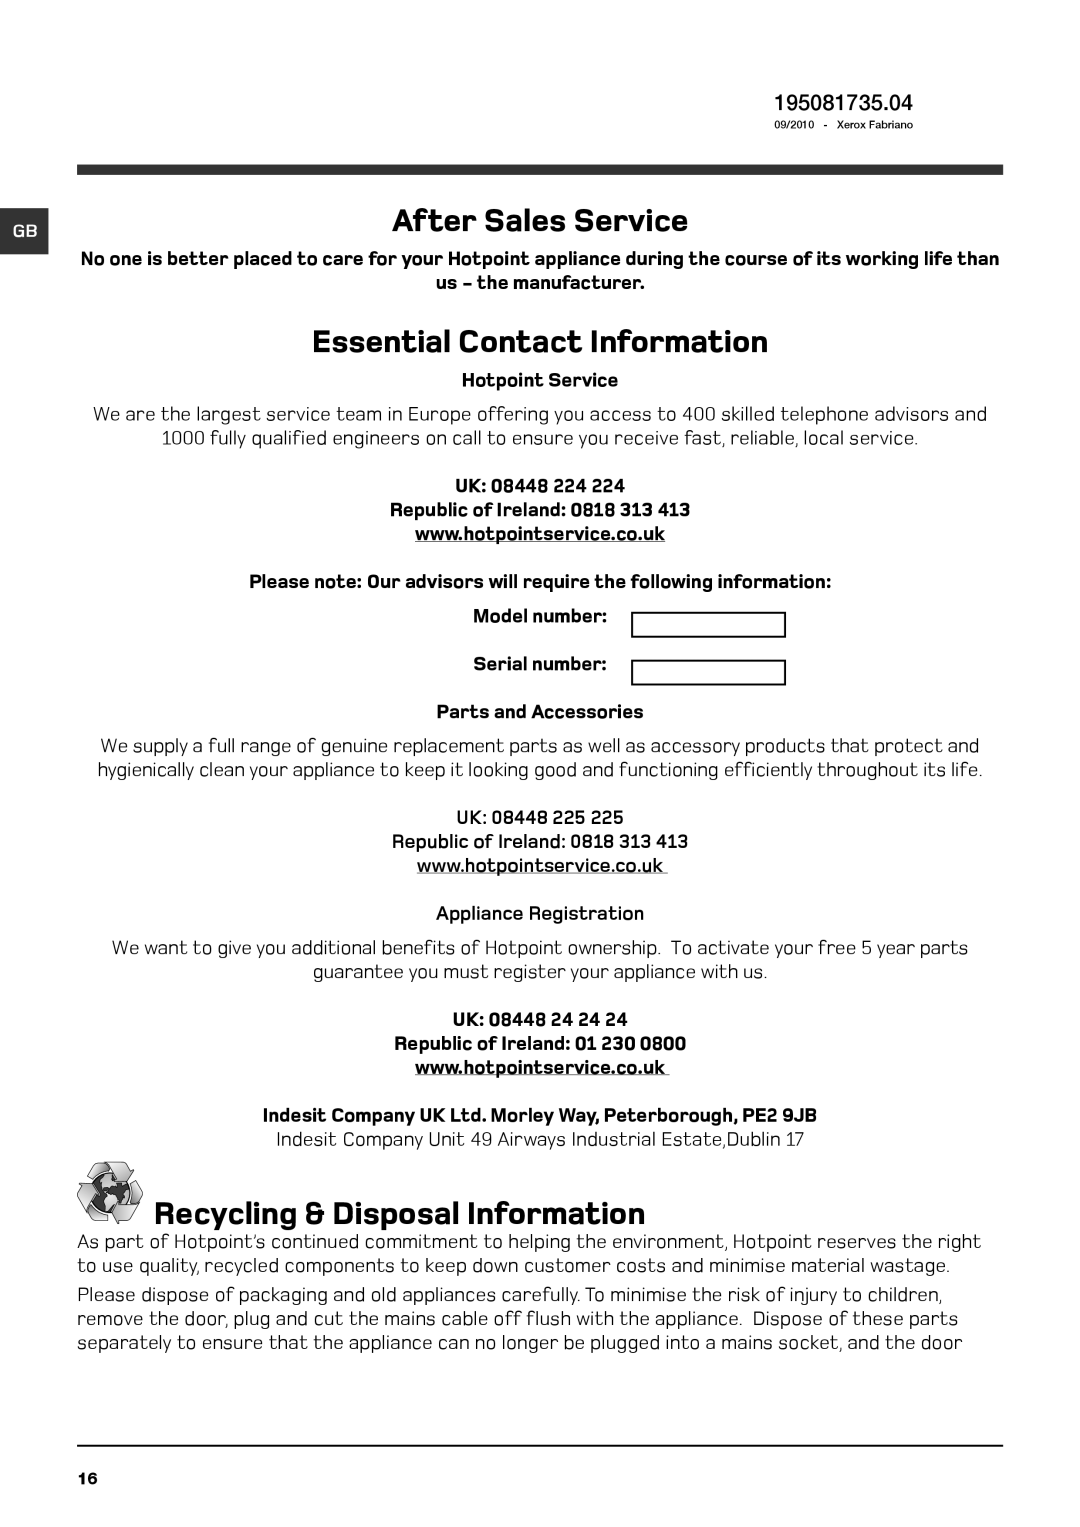 Hotpoint WDD After Sales Service, Recycling & Disposal Information, 195081735.04, Essential Contact Information 